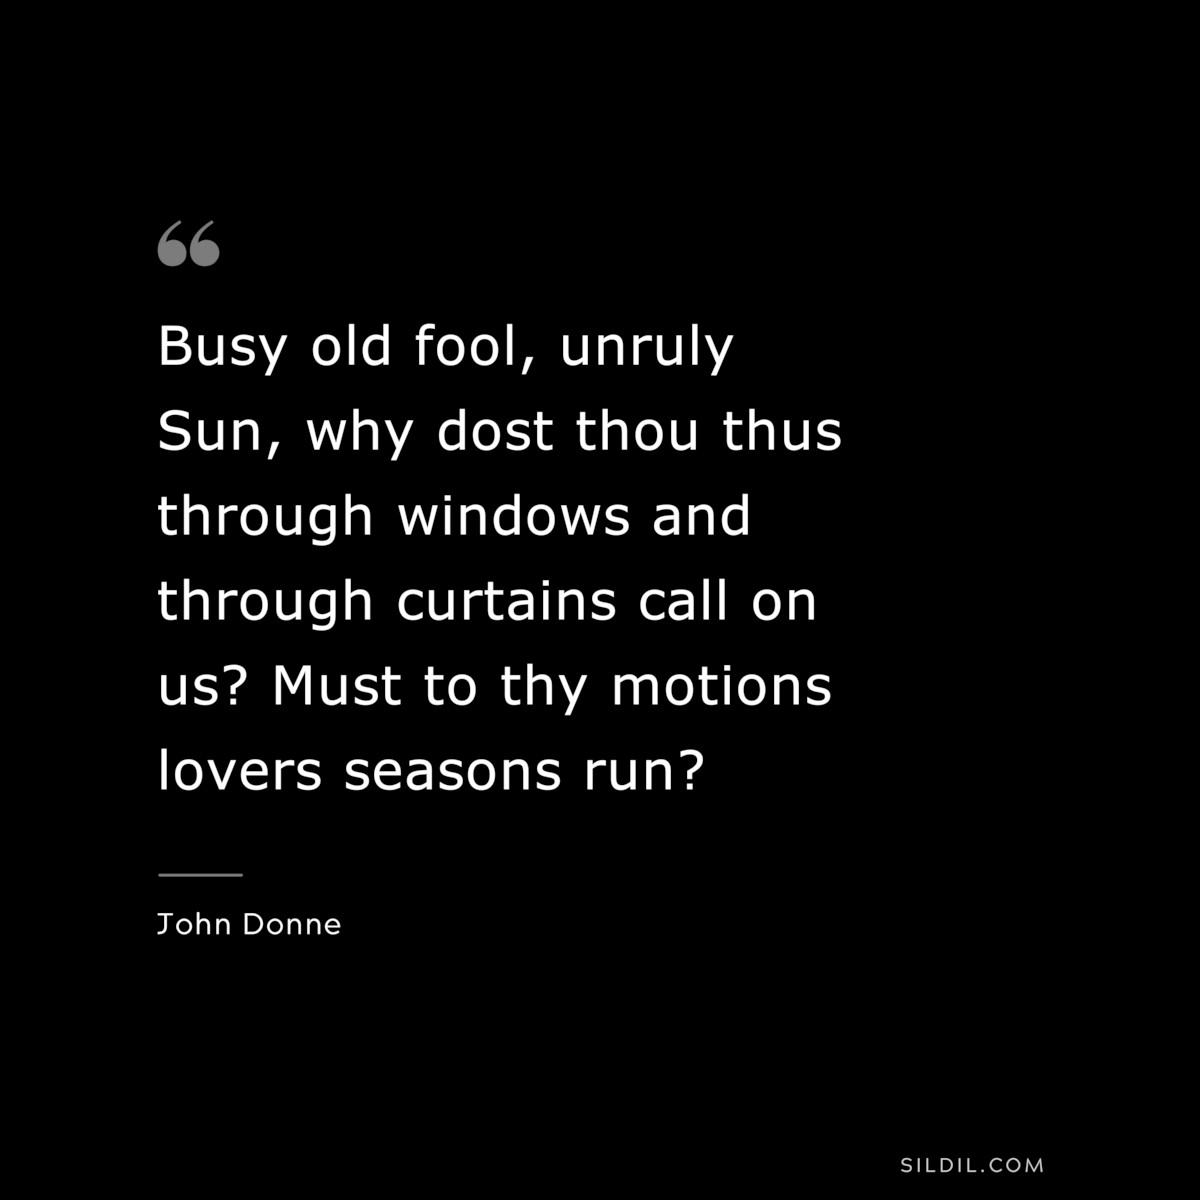 Busy old fool, unruly Sun, why dost thou thus through windows and through curtains call on us? Must to thy motions lovers seasons run? ― John Donne